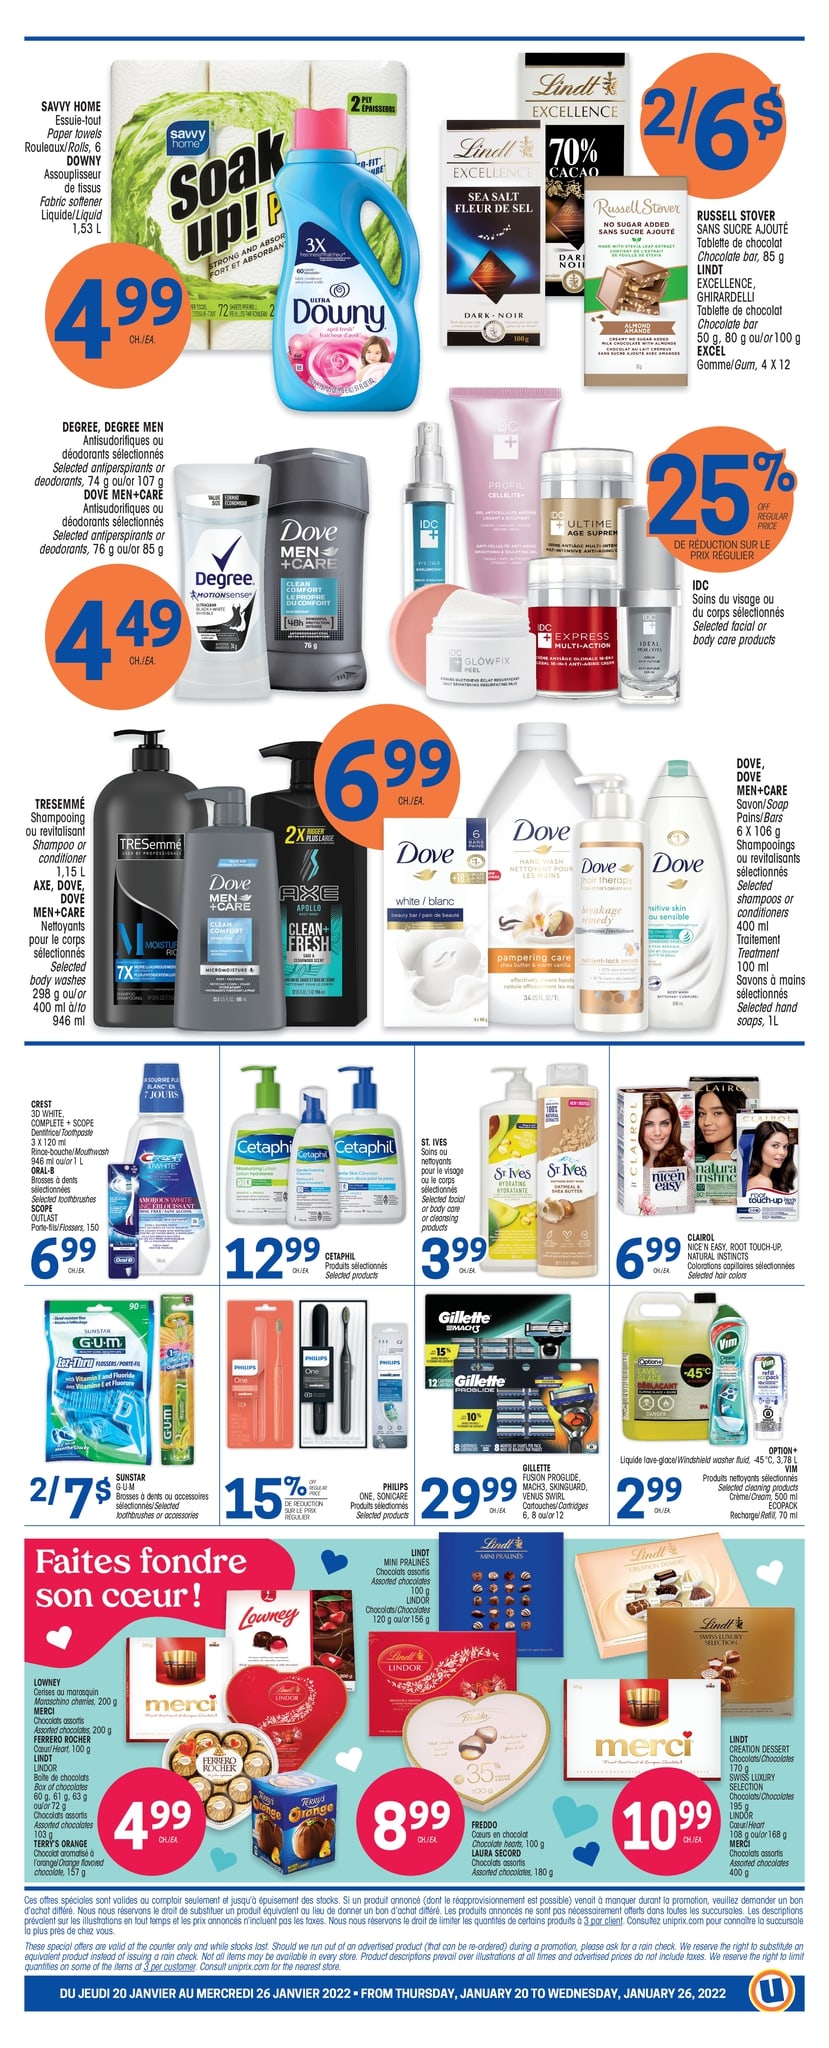 Uniprix - Weekly Flyer Specials - Page 4